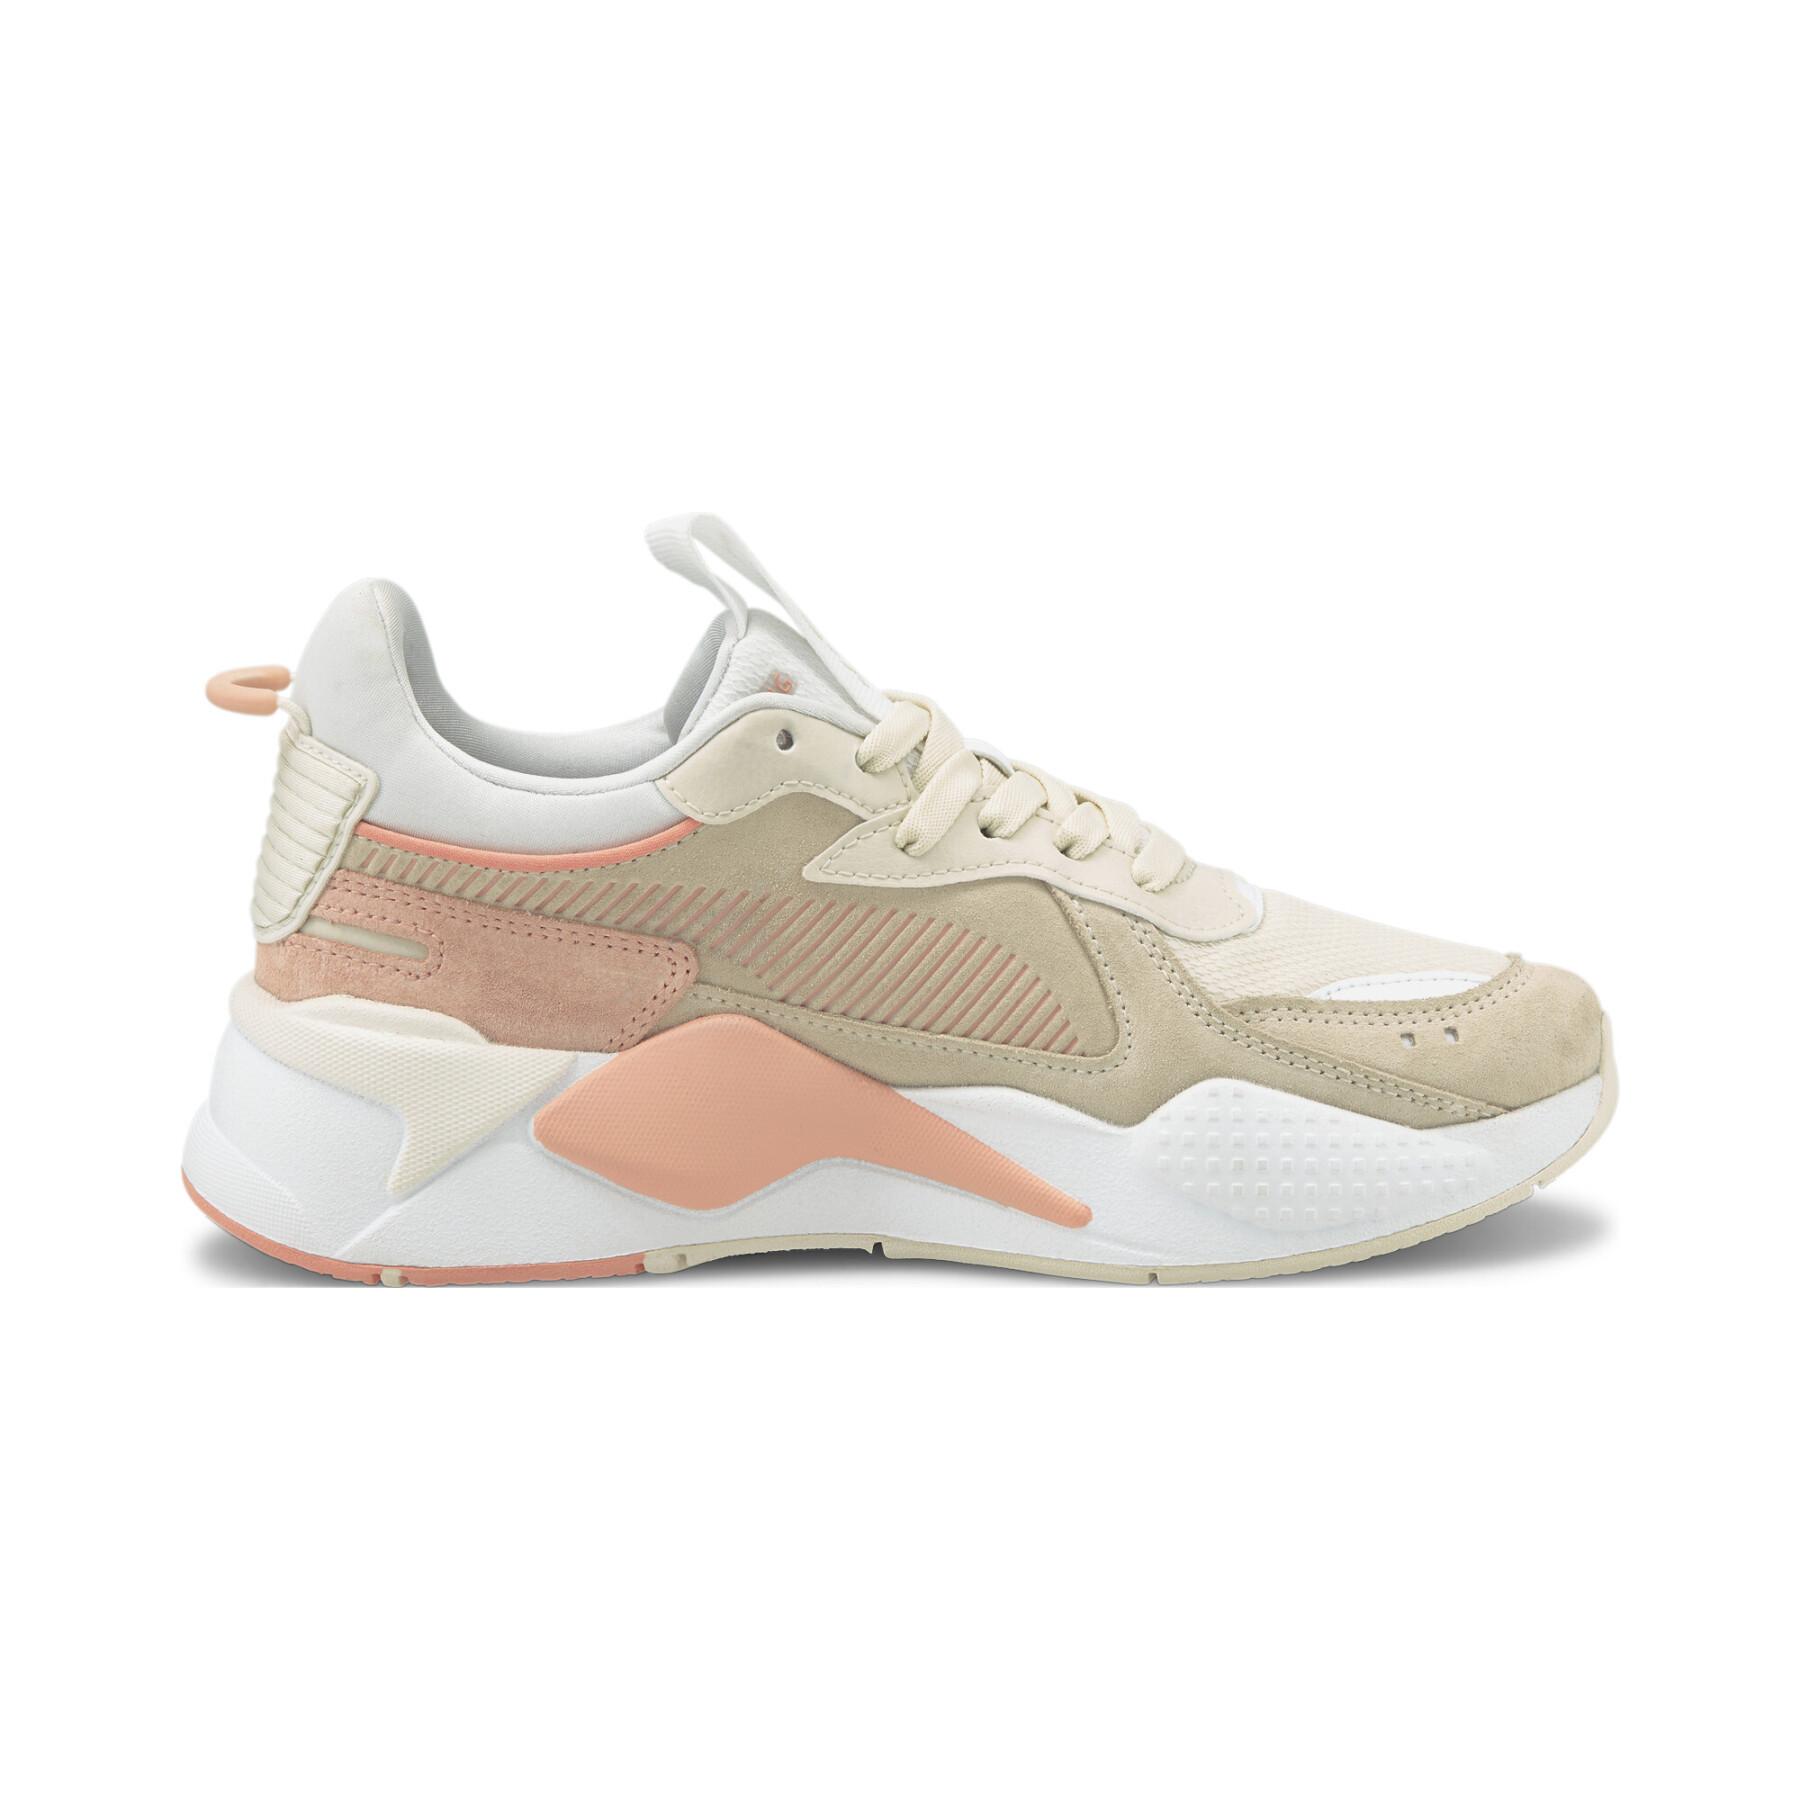 Women's sneakers Puma RS-X Reinvent Wn's